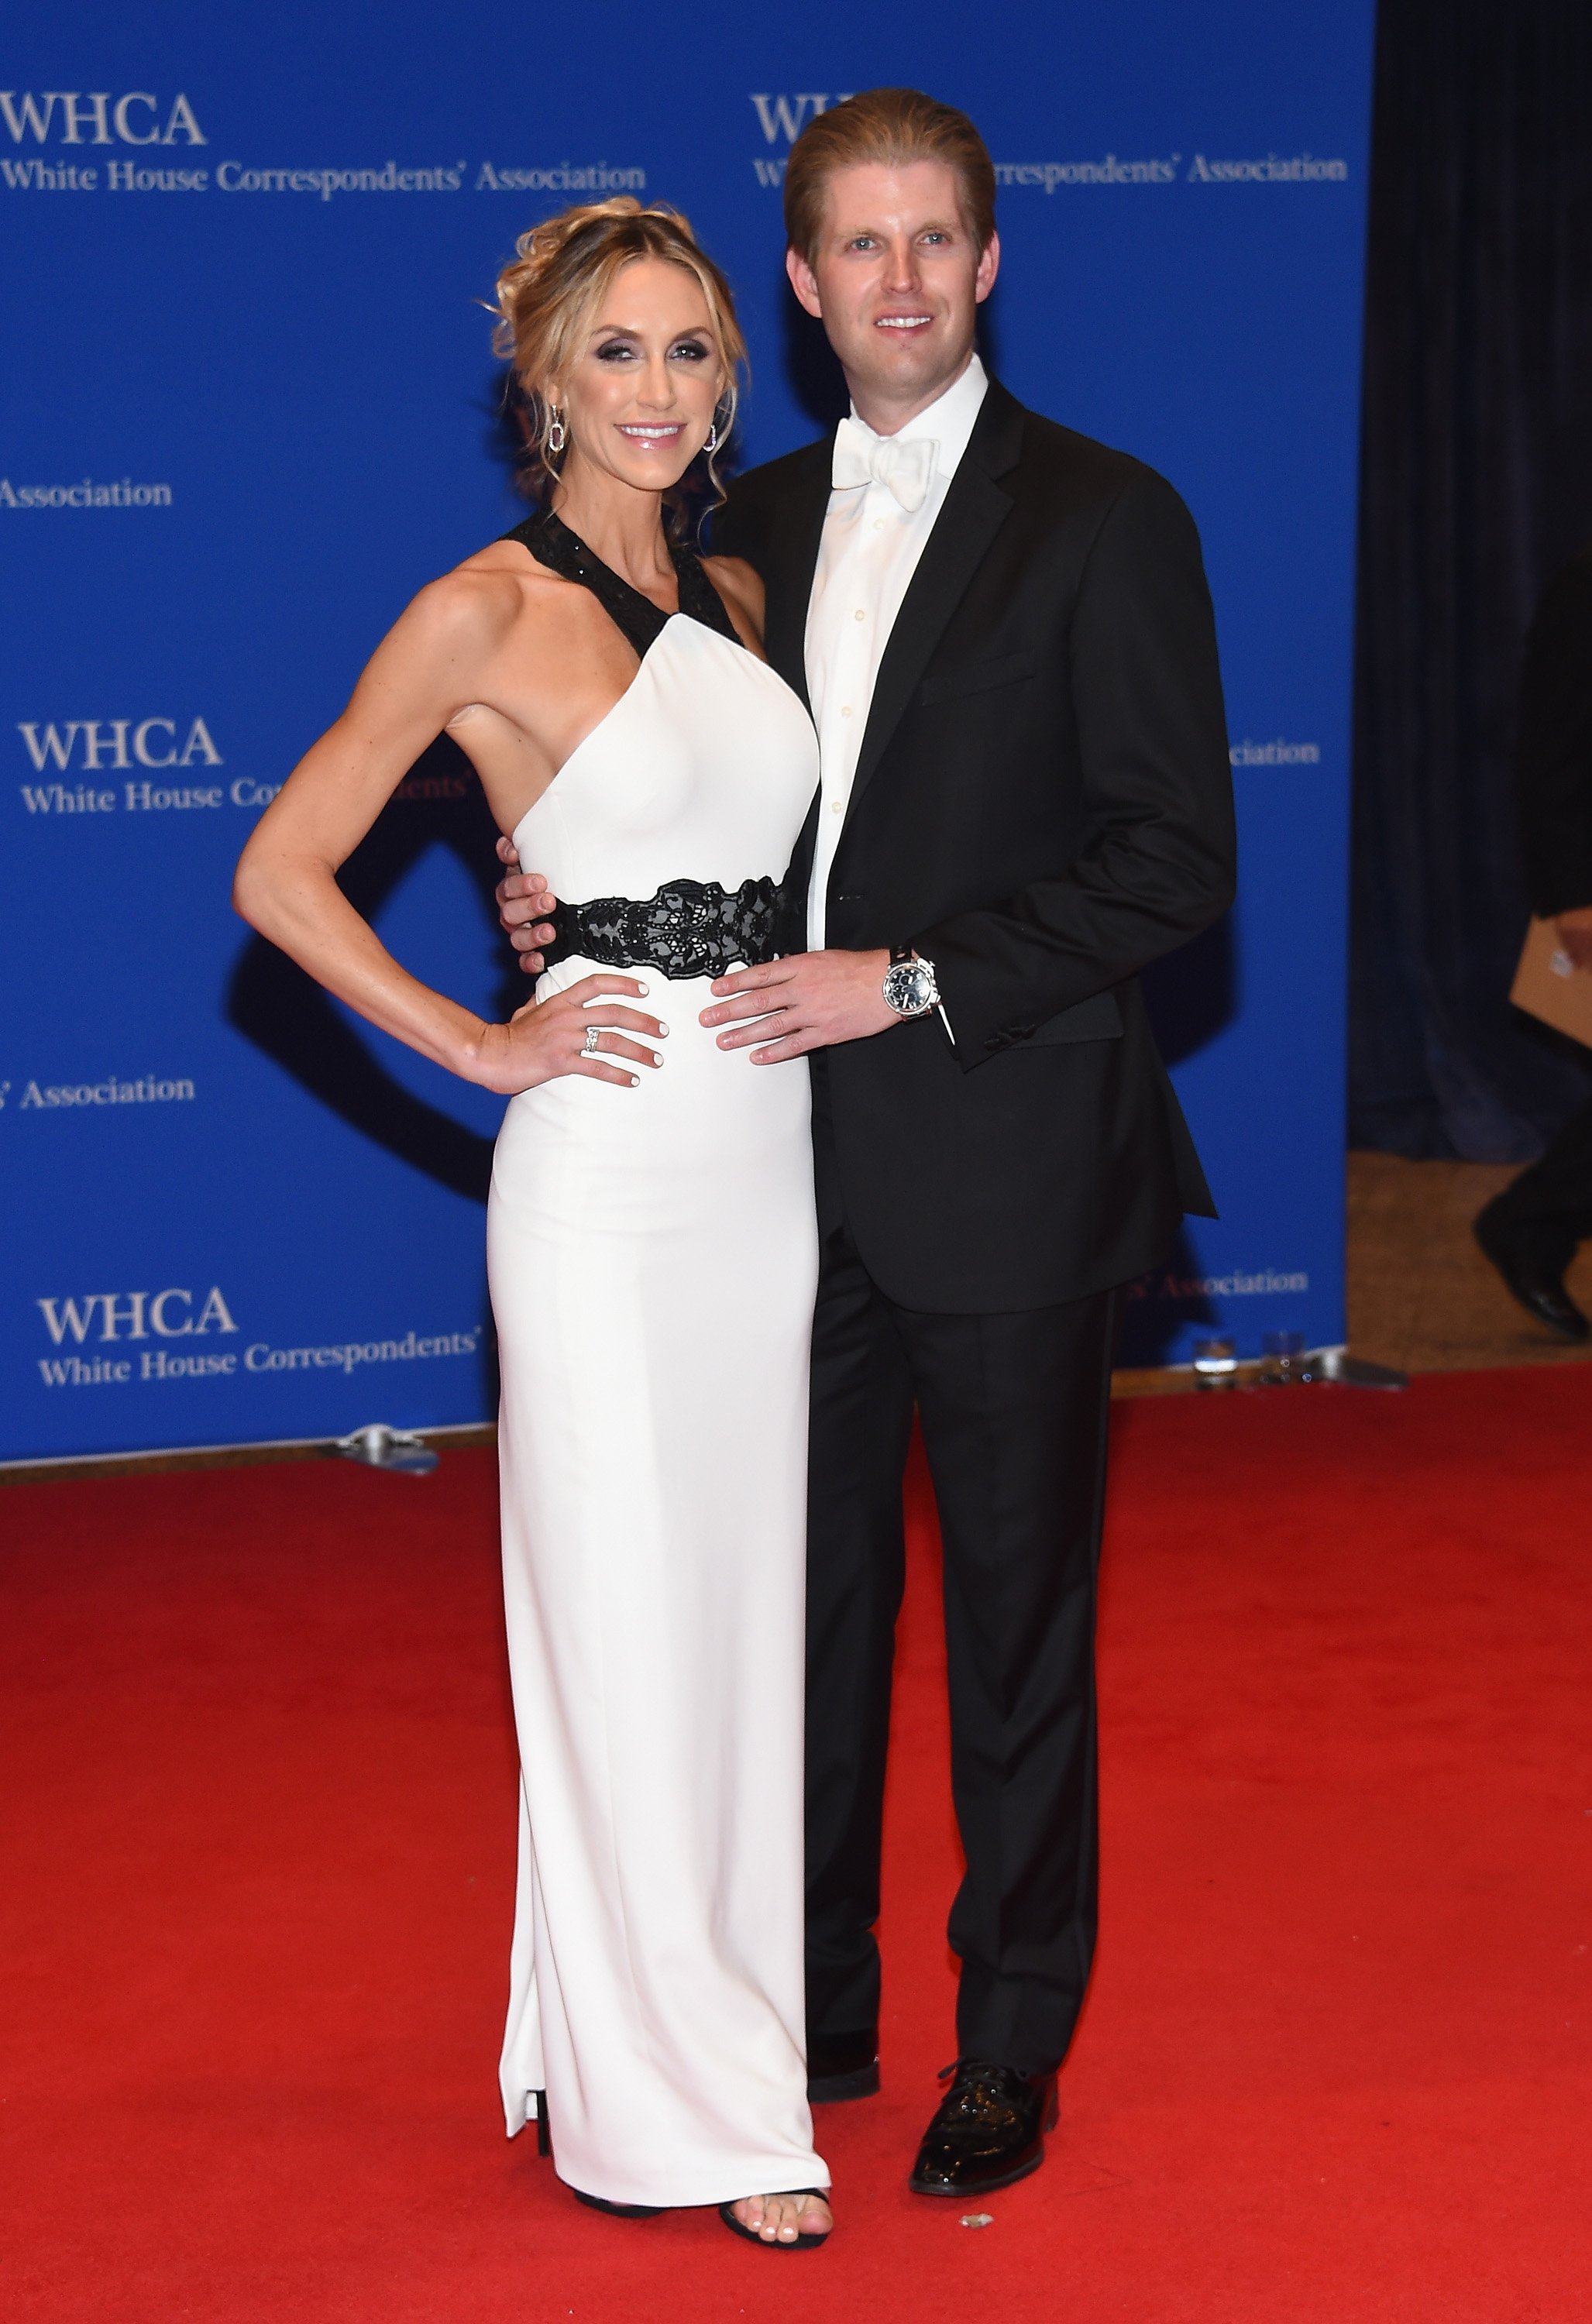 Lara and Eric Trump attend the White House Correspondents' Association Dinner in Washington, DC on April 30, 2016 | Photo: Getty Images